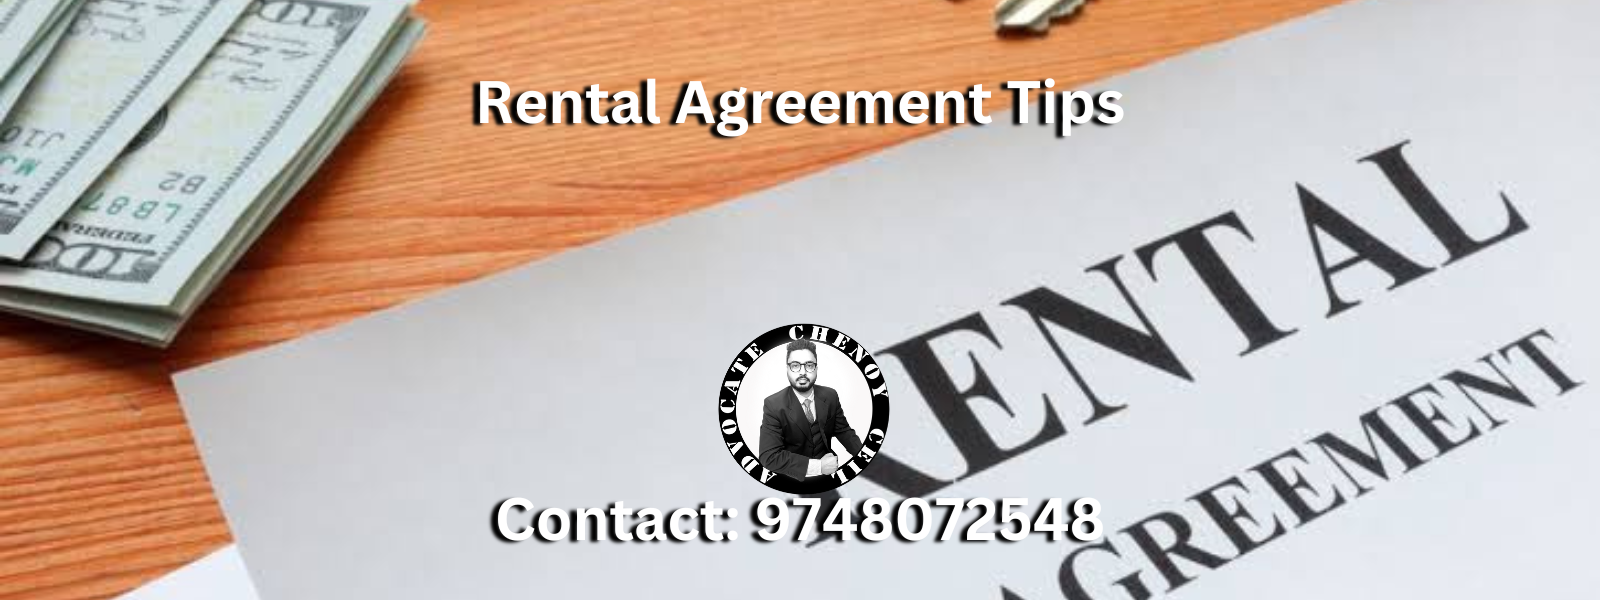 Tips to Create Rental Agrements